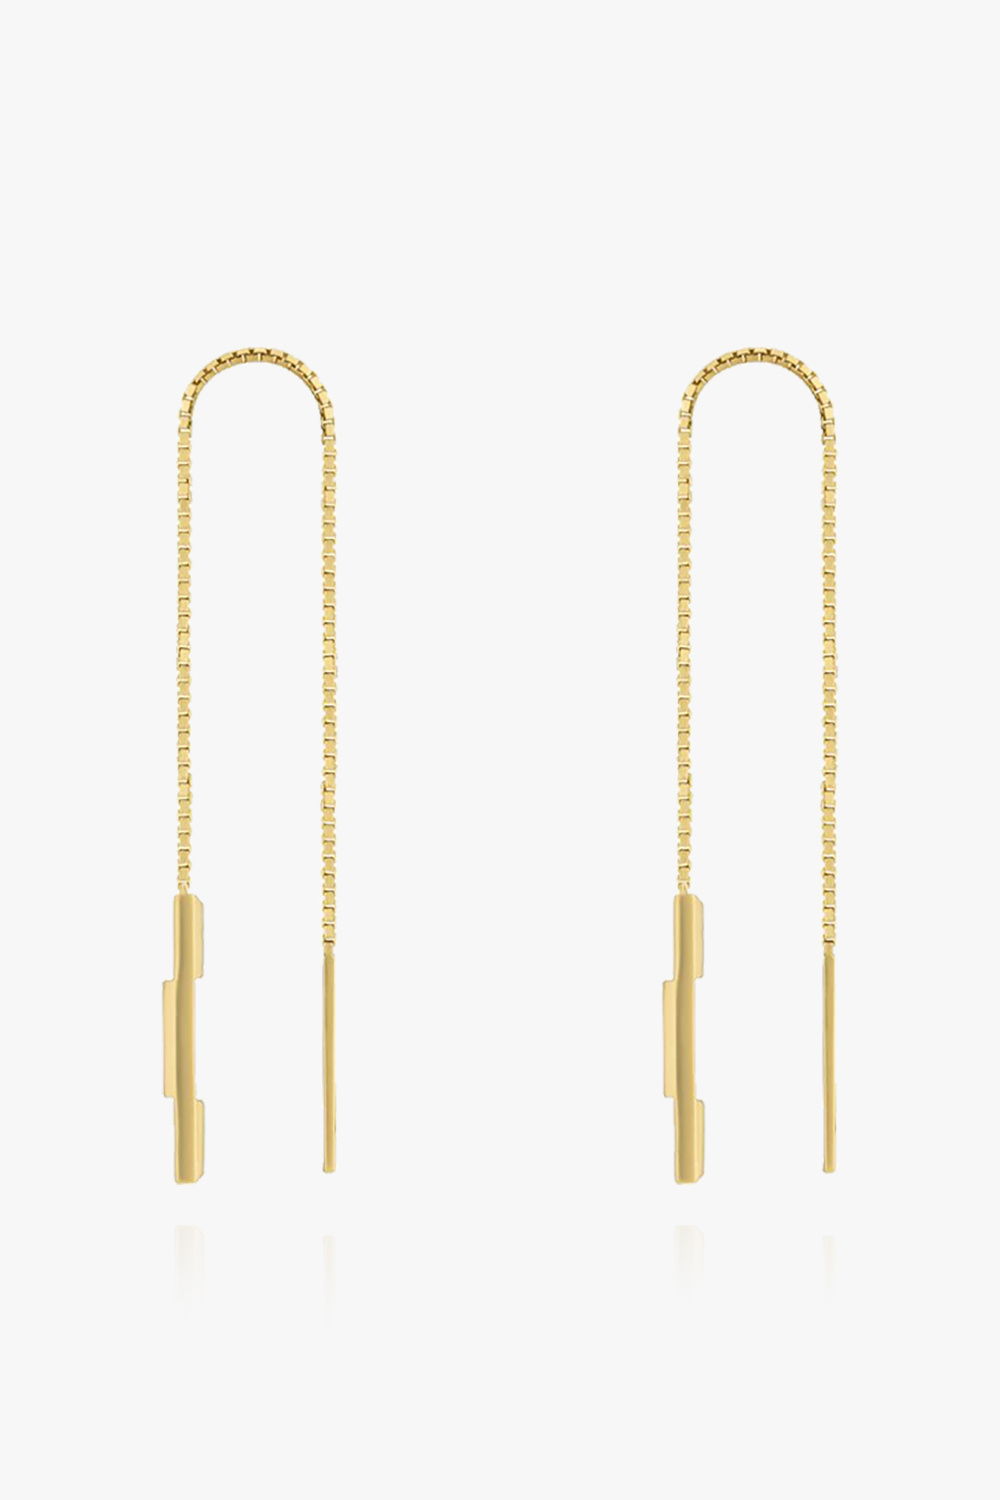 gucci sustainable Gold earrings